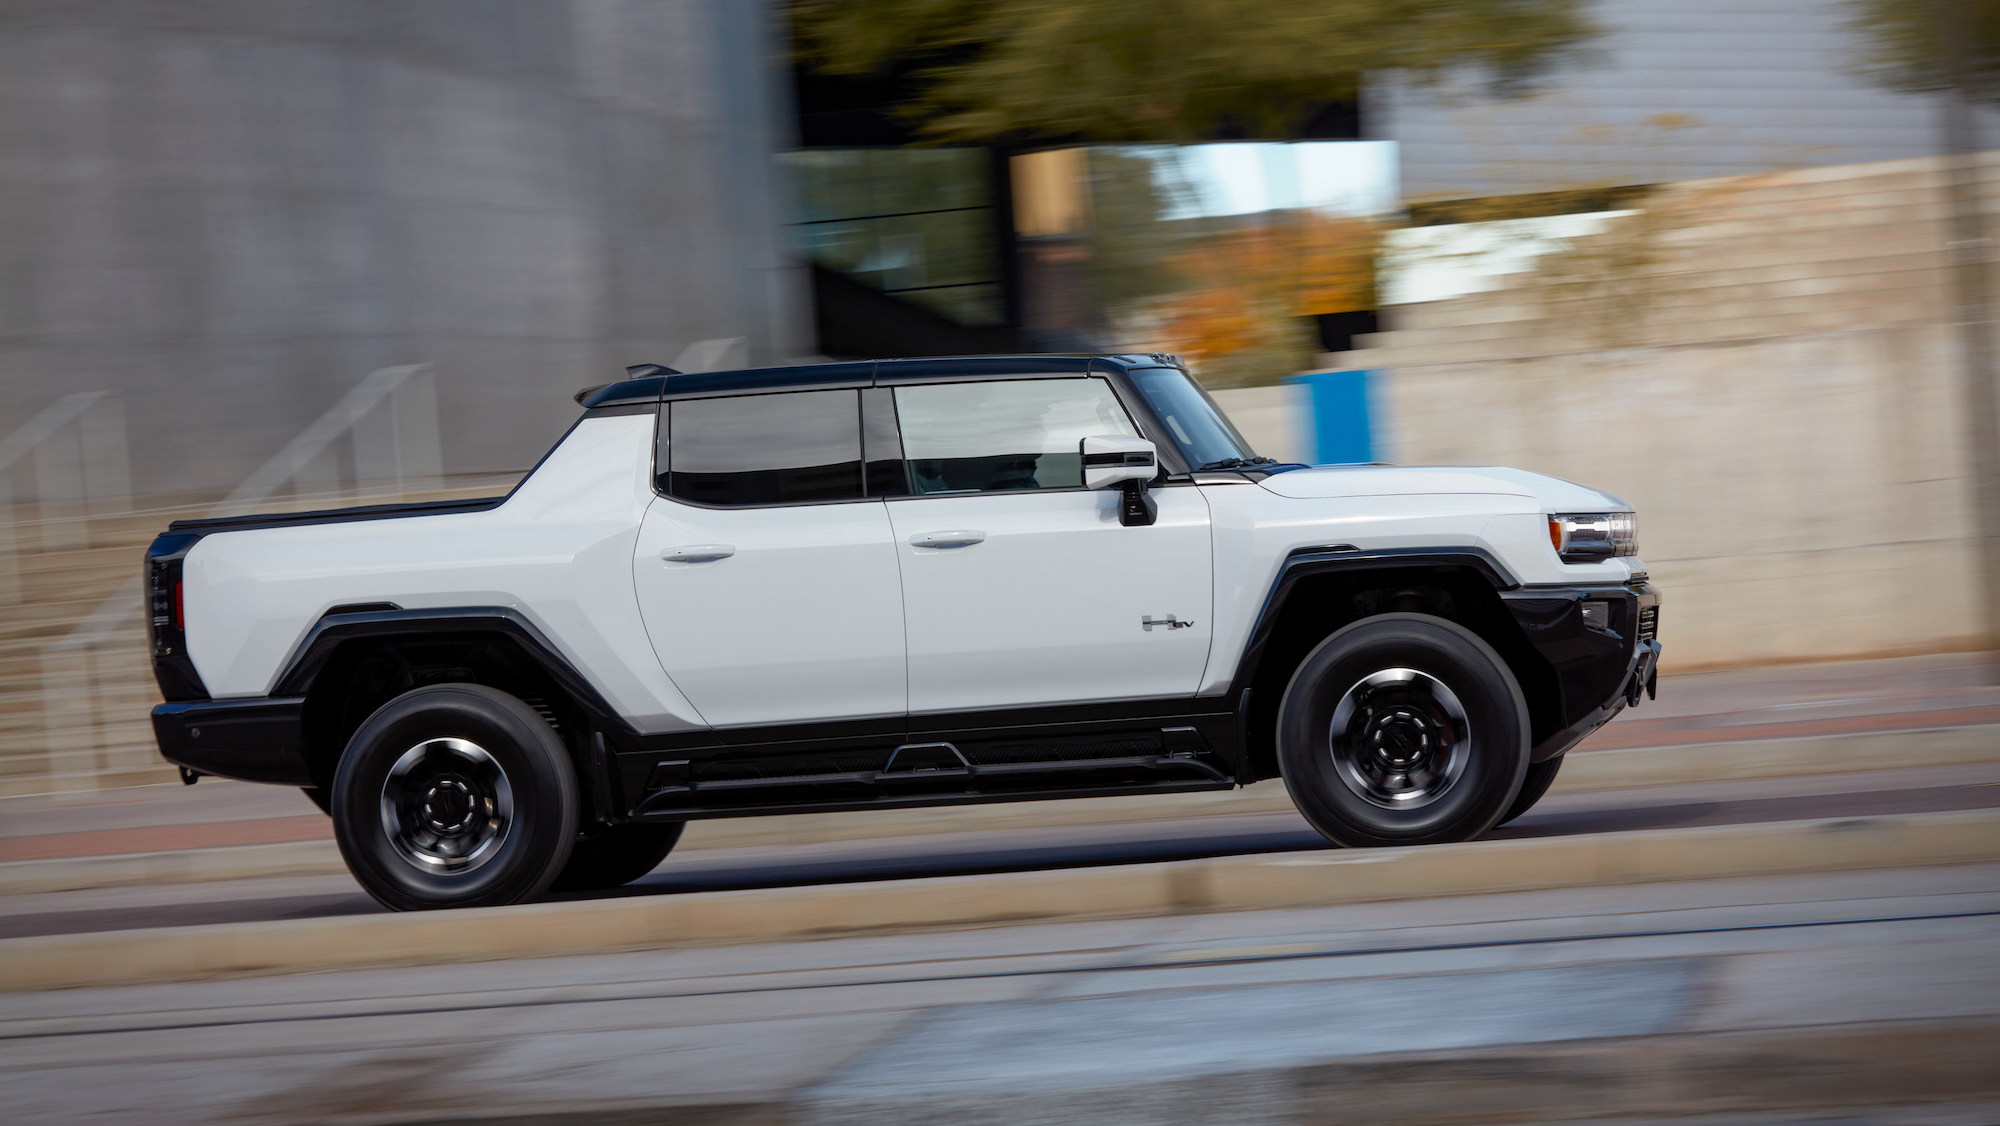 Which vehicle would win—an electric Hummer or a Corvette?